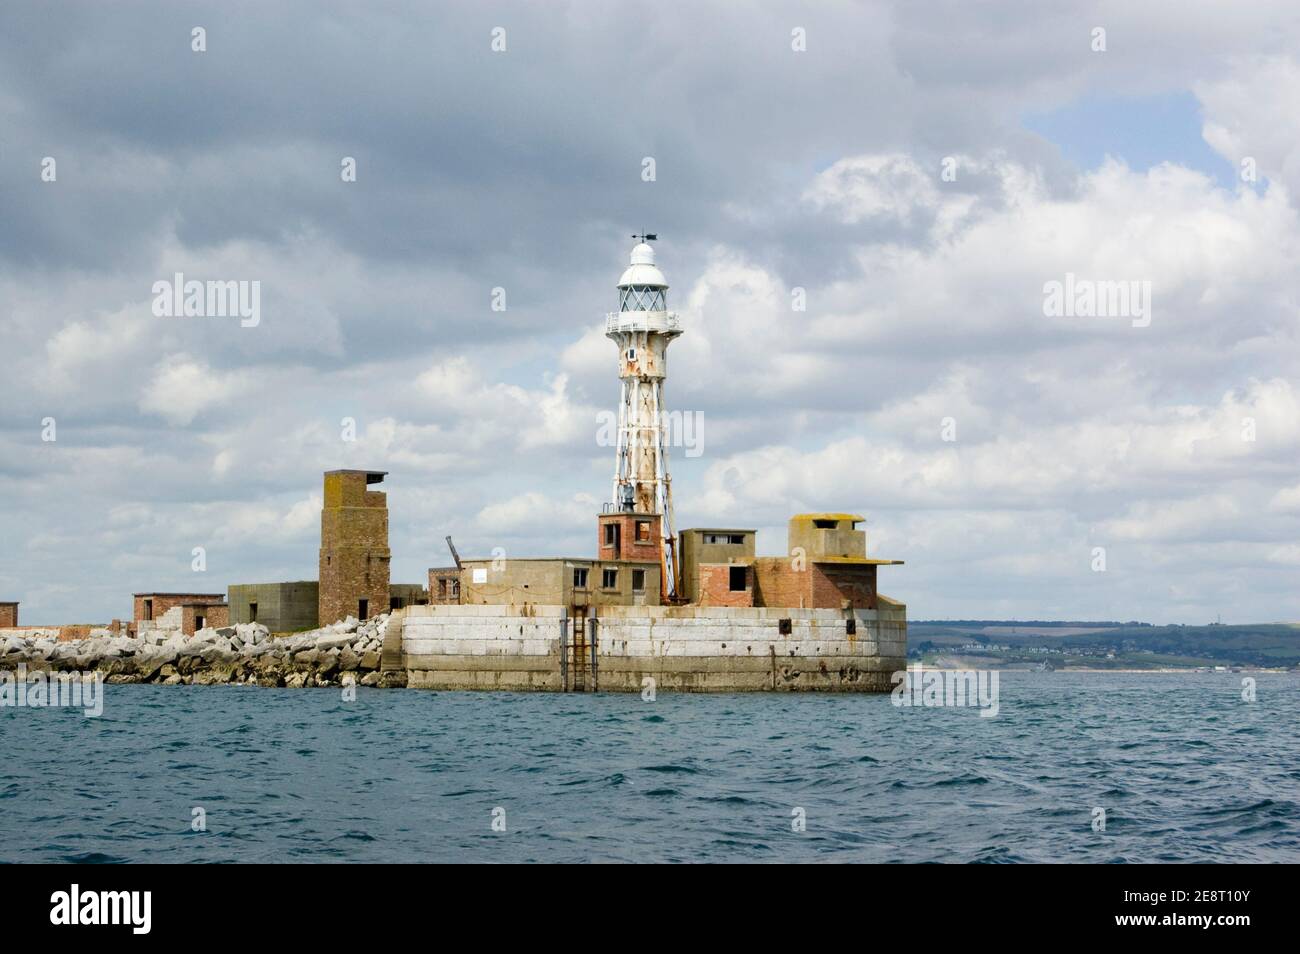 View from a boat of the East entrance to Portland Harbour, Dorset. Stock Photo